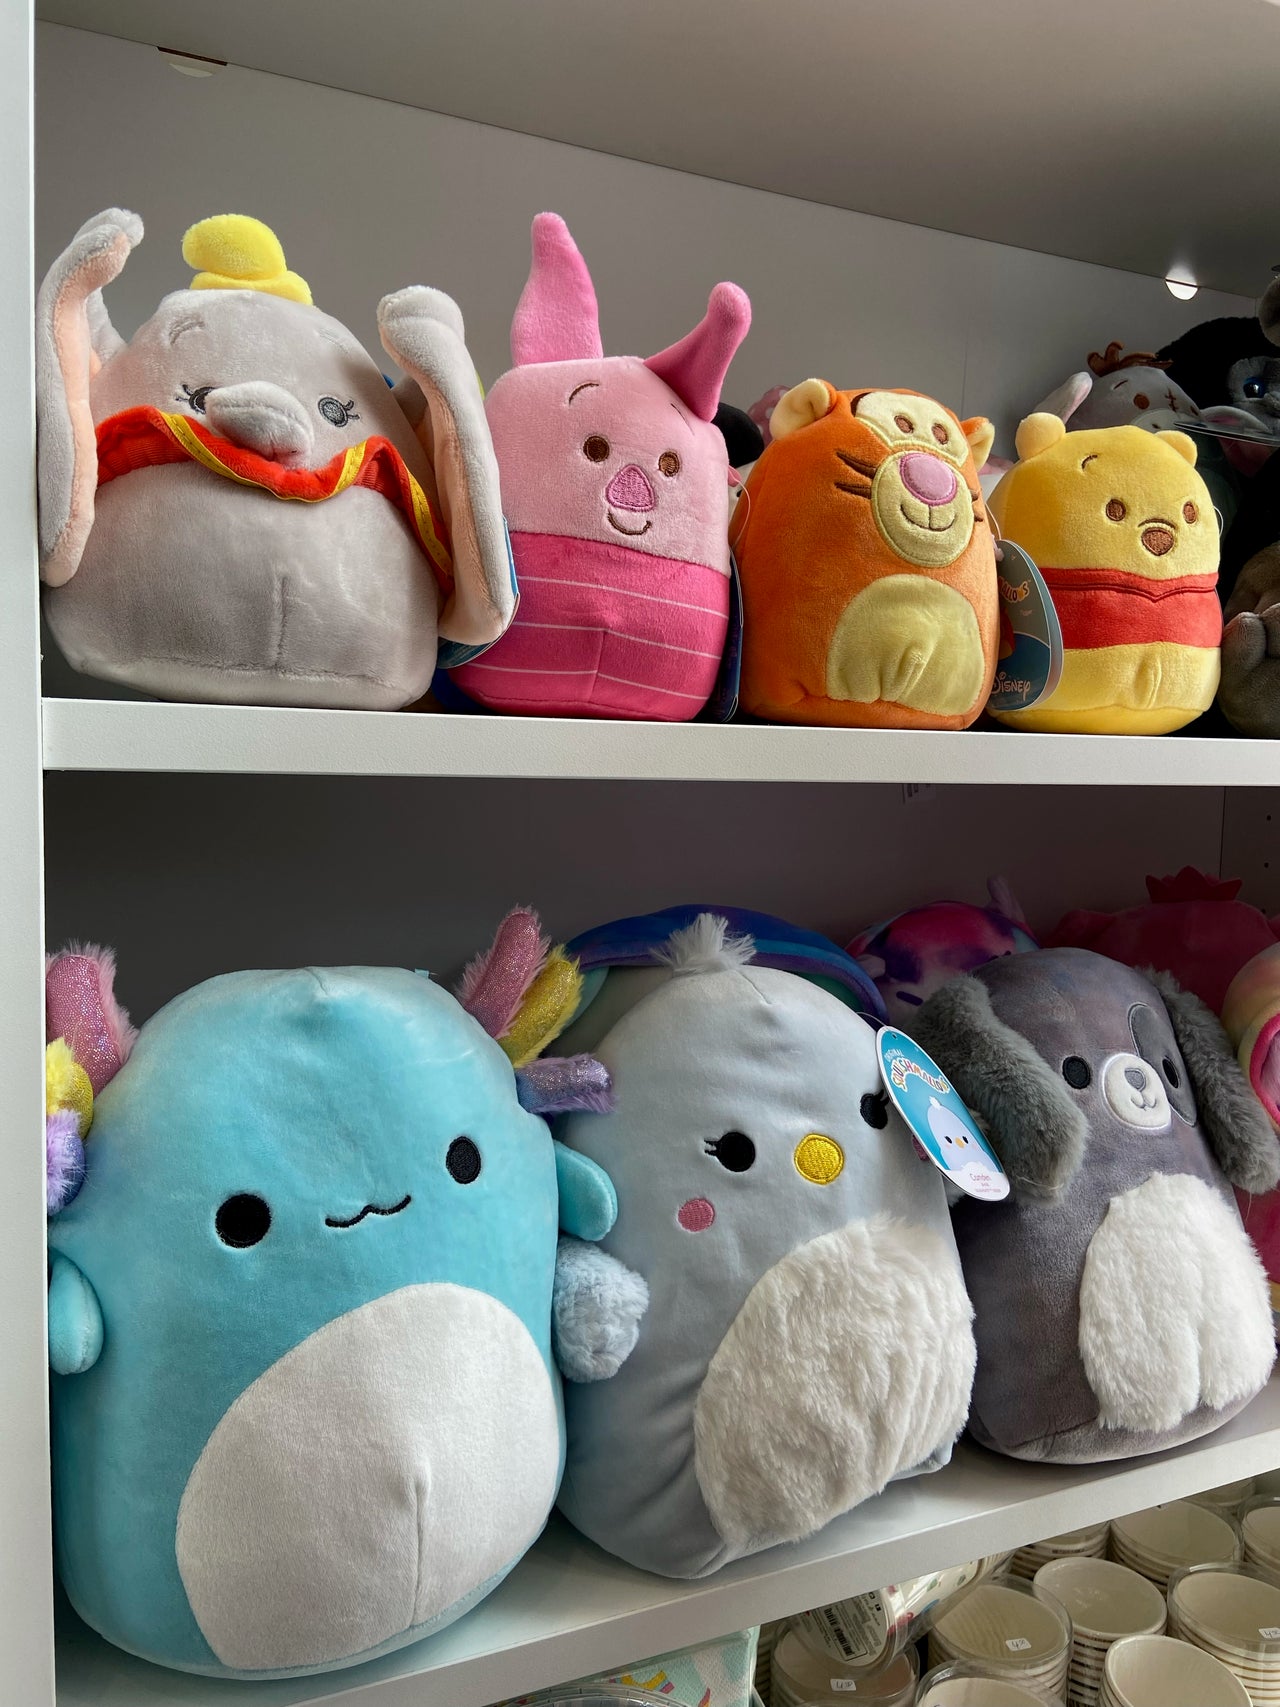 Squishmallows: Cuddly Characters That'll Steal Your Heart